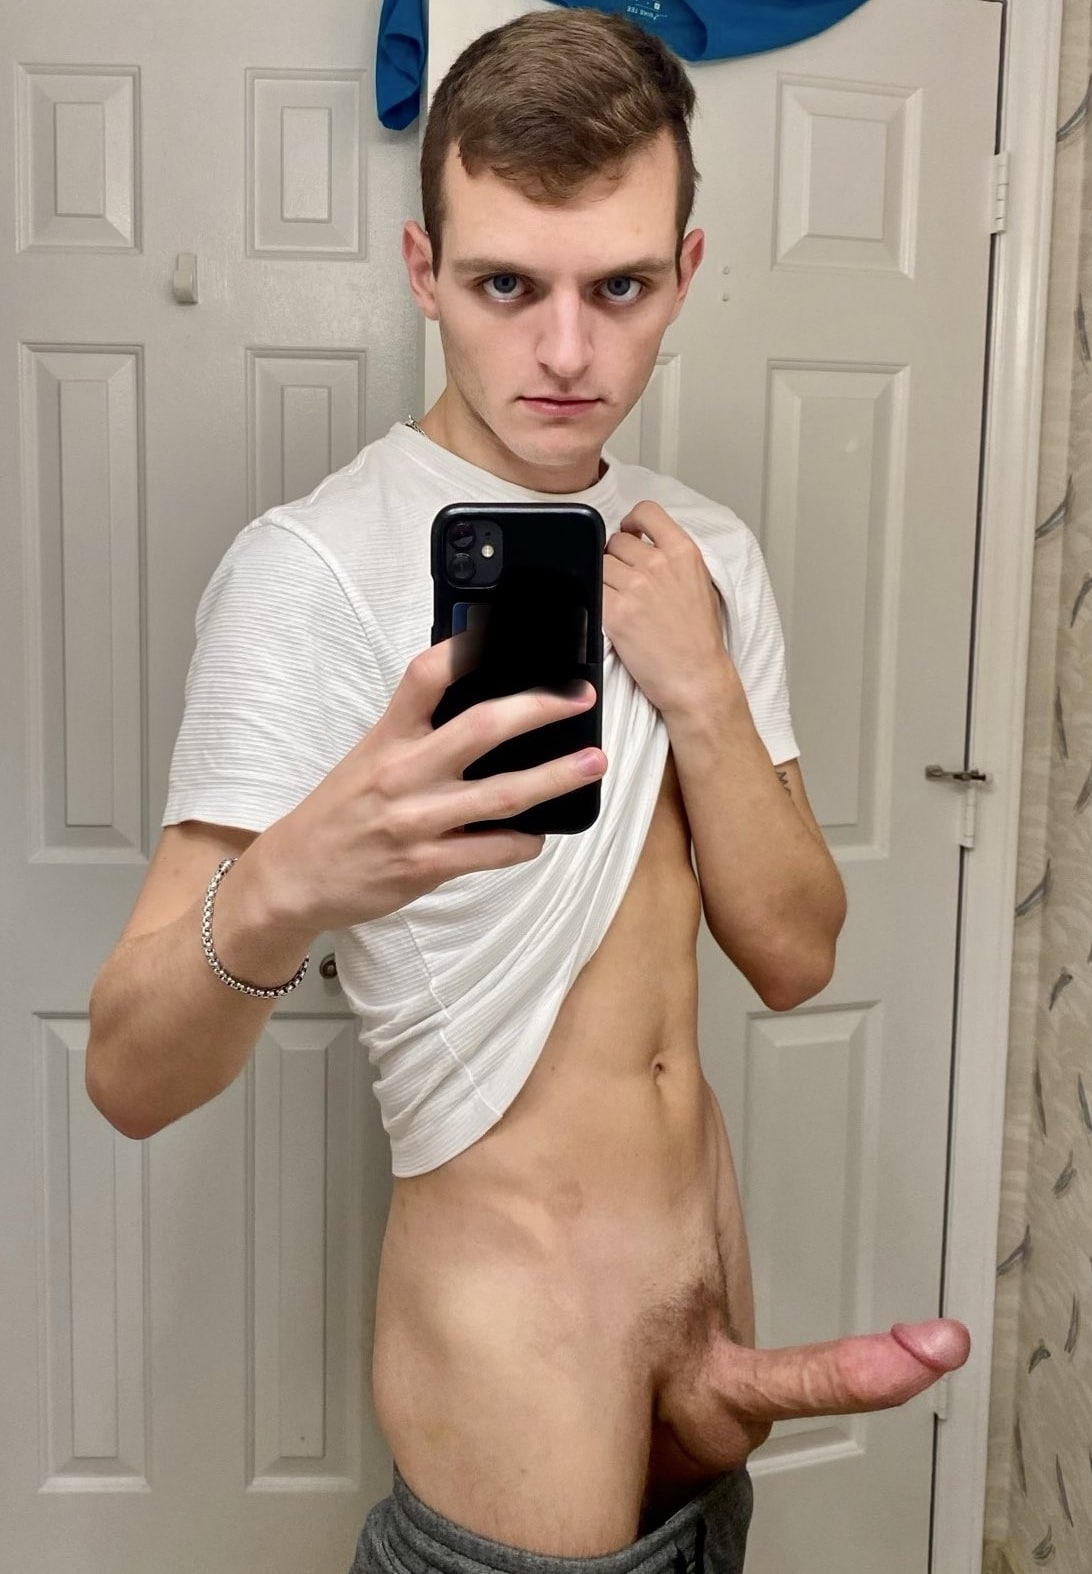 Huge Dick Mirror - Mirror boy with a hard penis - Penis Pictures